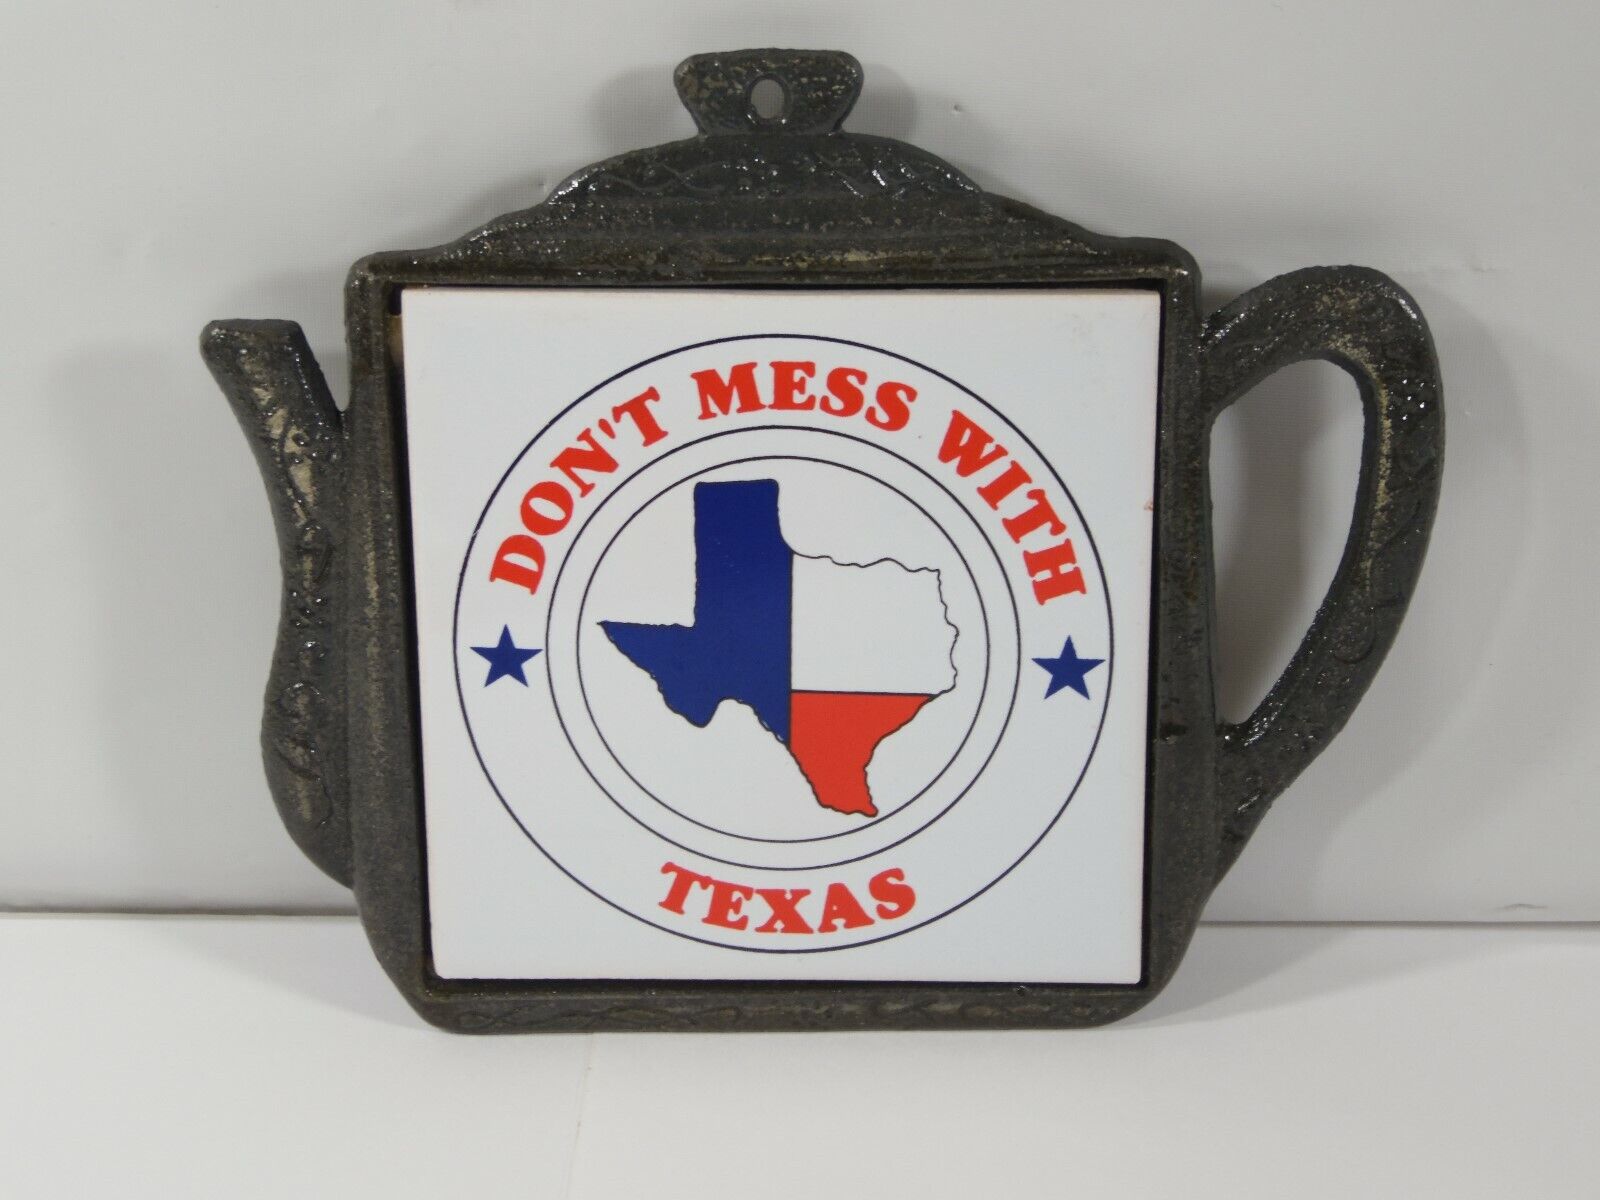  BEAUTIFUL 1980\'s VINTAGE \'DON\'T MESS WITH TEXAS\' TRIVET/WALL DECOR